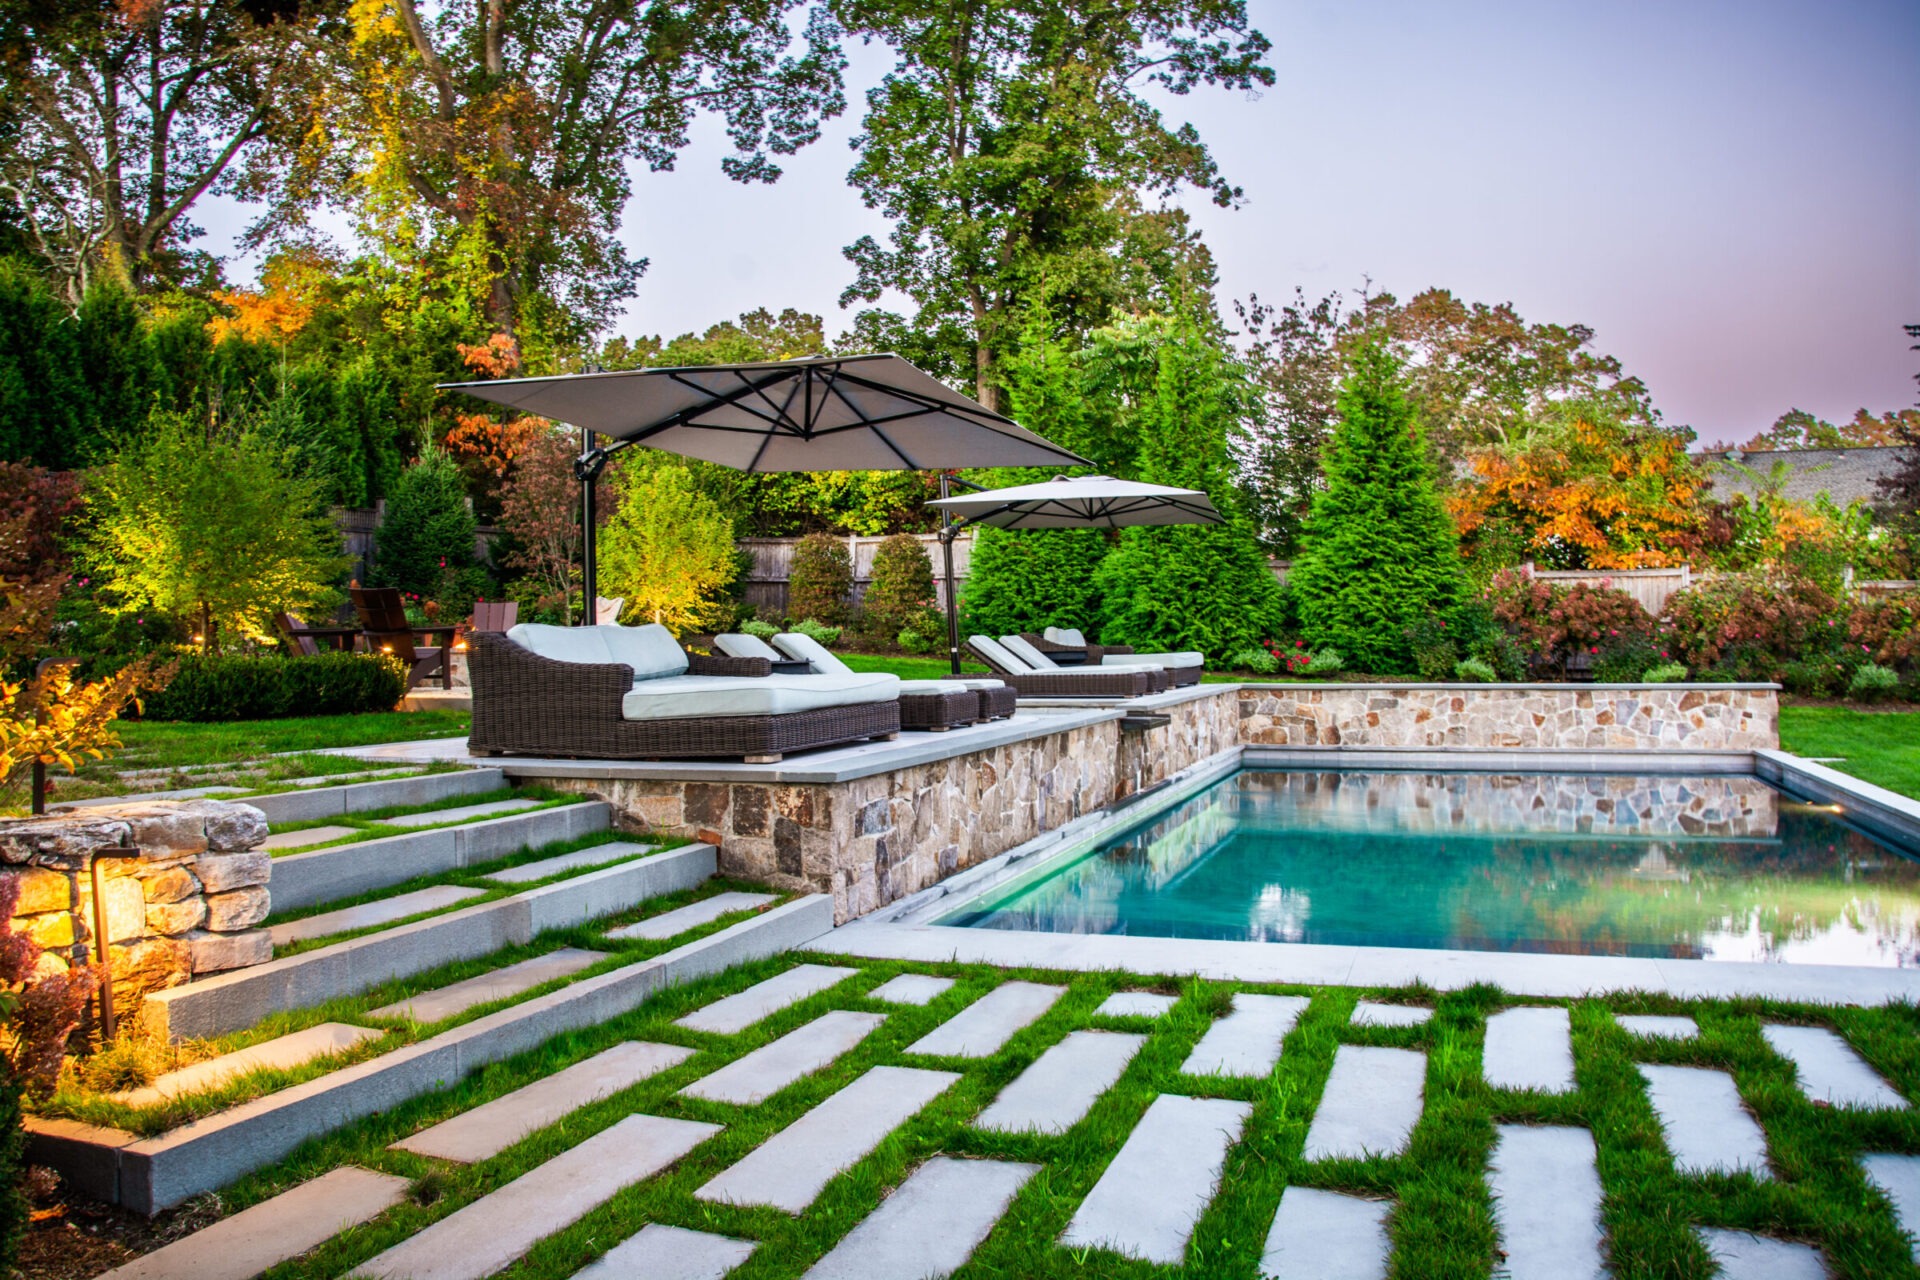 A luxurious backyard with a rectangular pool, stone pathways, outdoor furniture under an umbrella, lush greenery, and a well-manicured lawn at twilight.